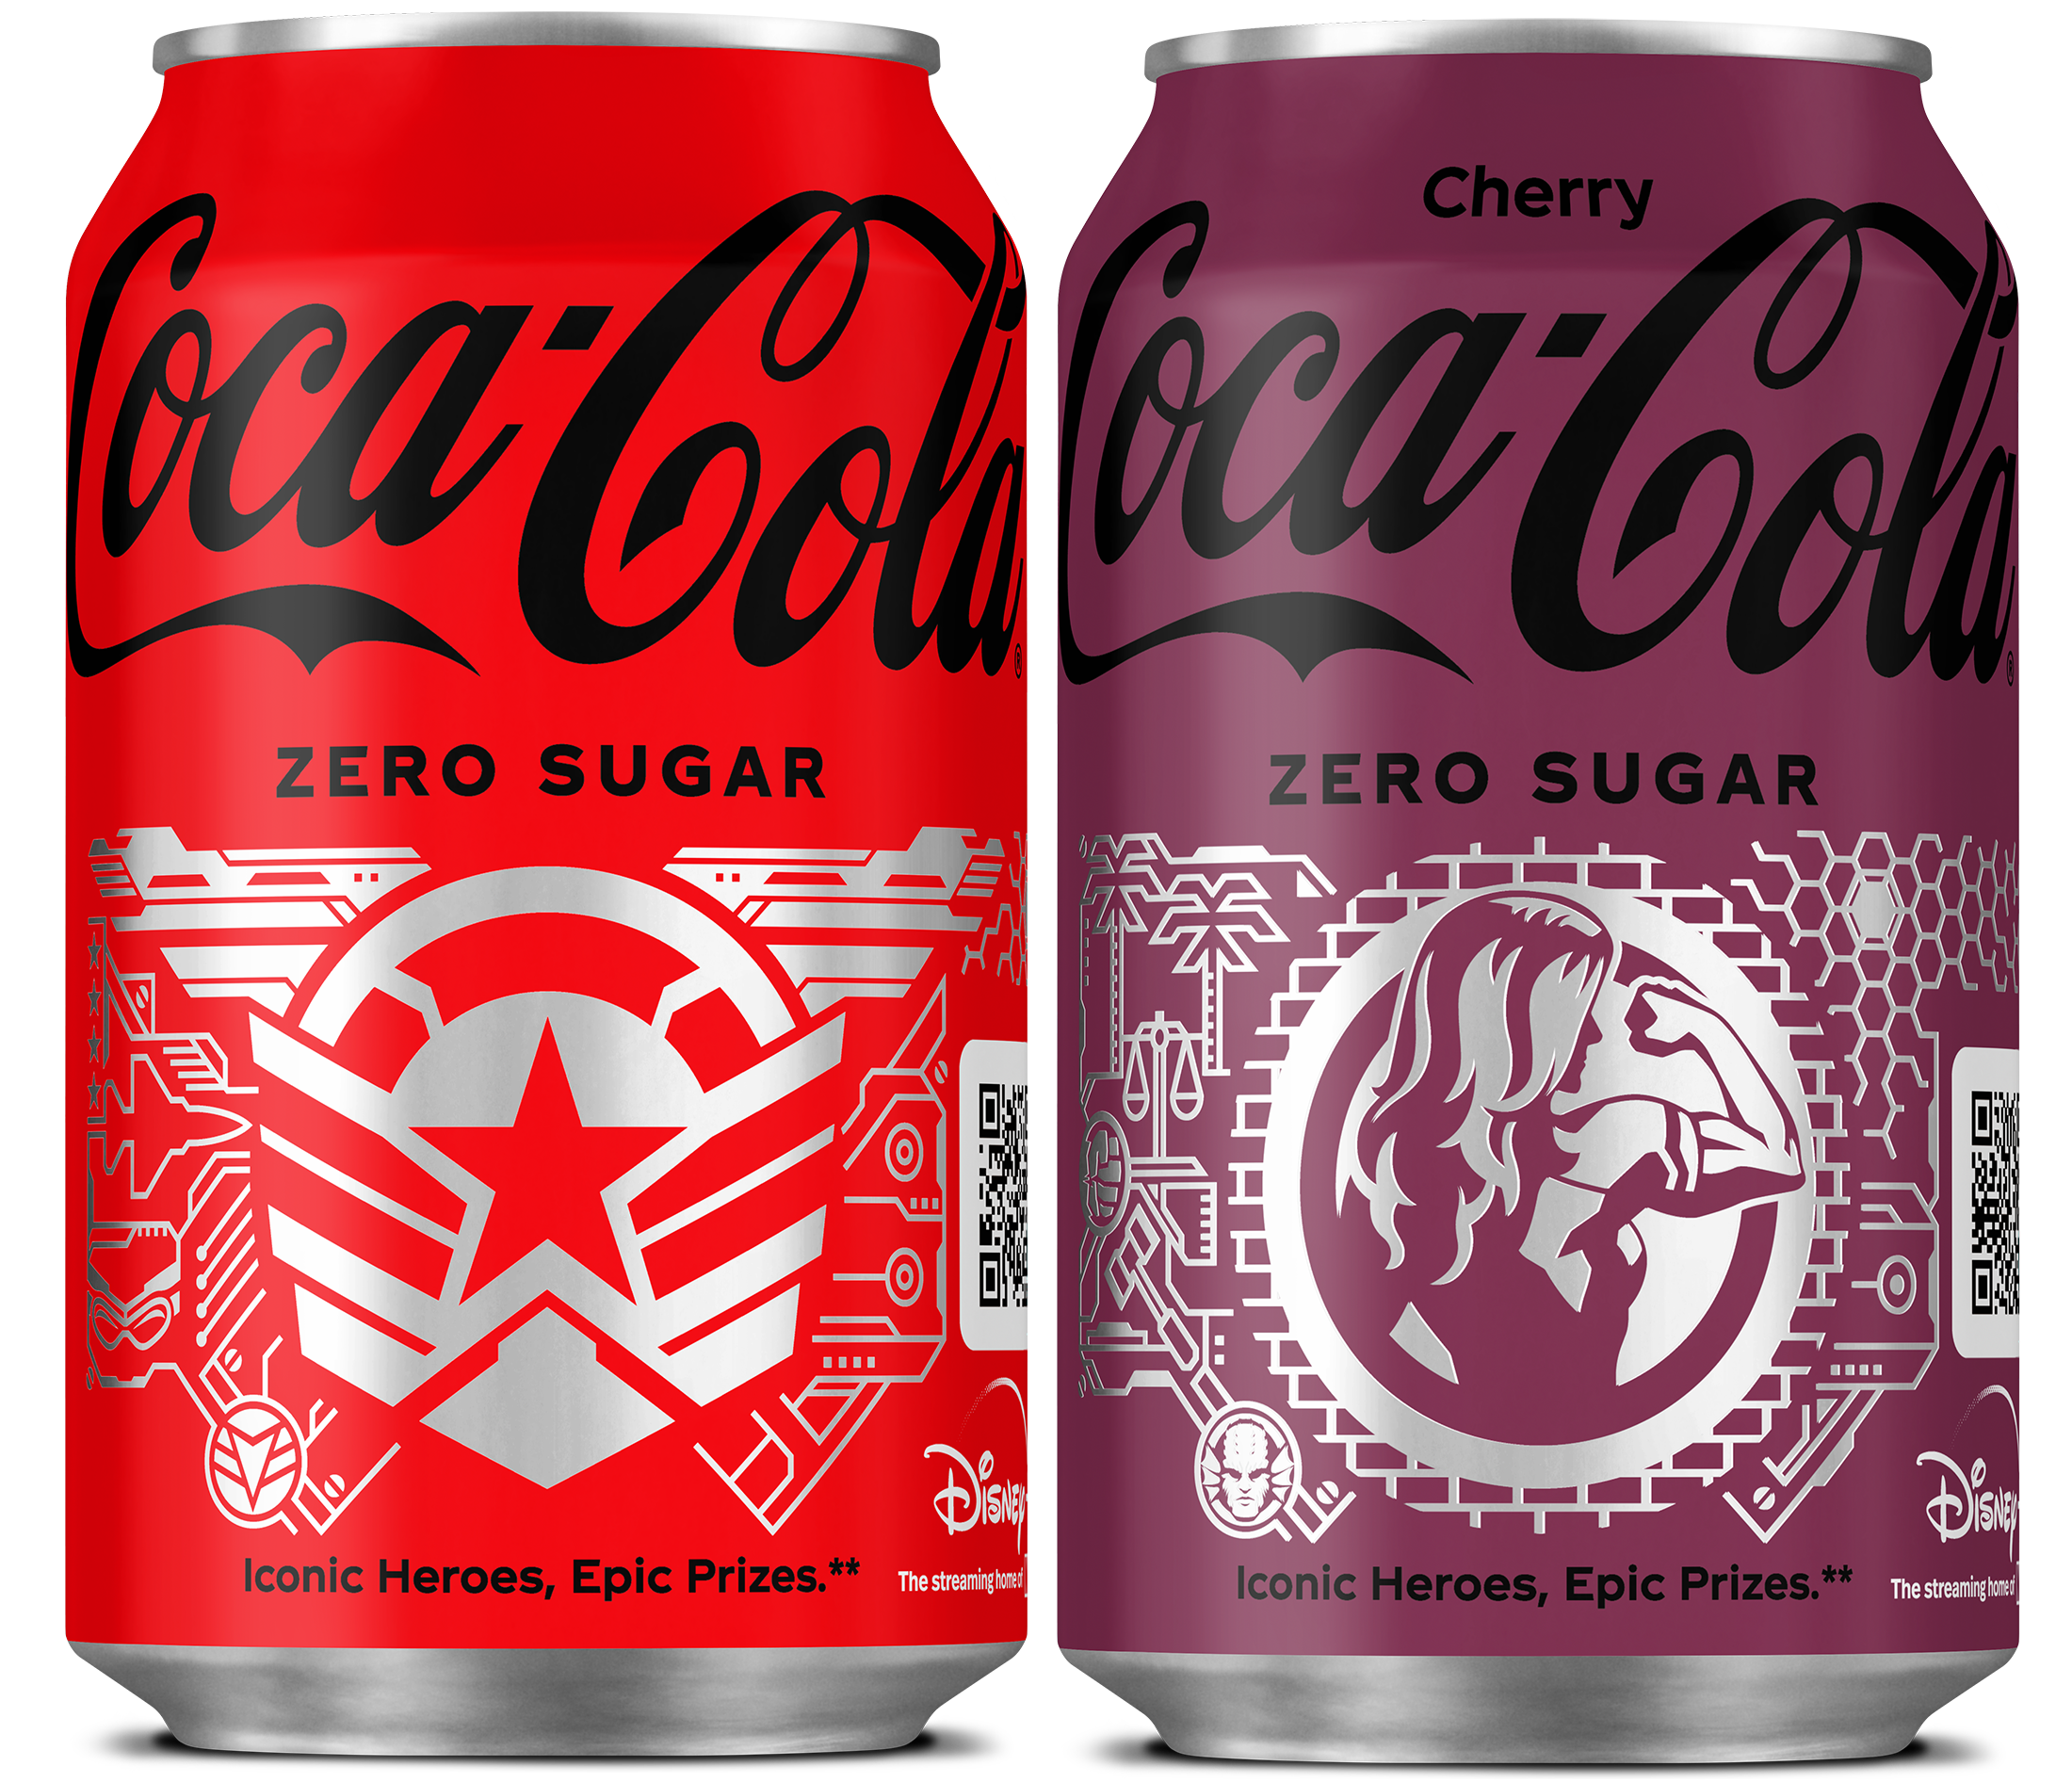 ‘The Multiverse Awaits’: Coca-Cola and Marvel promotion, campaign launches